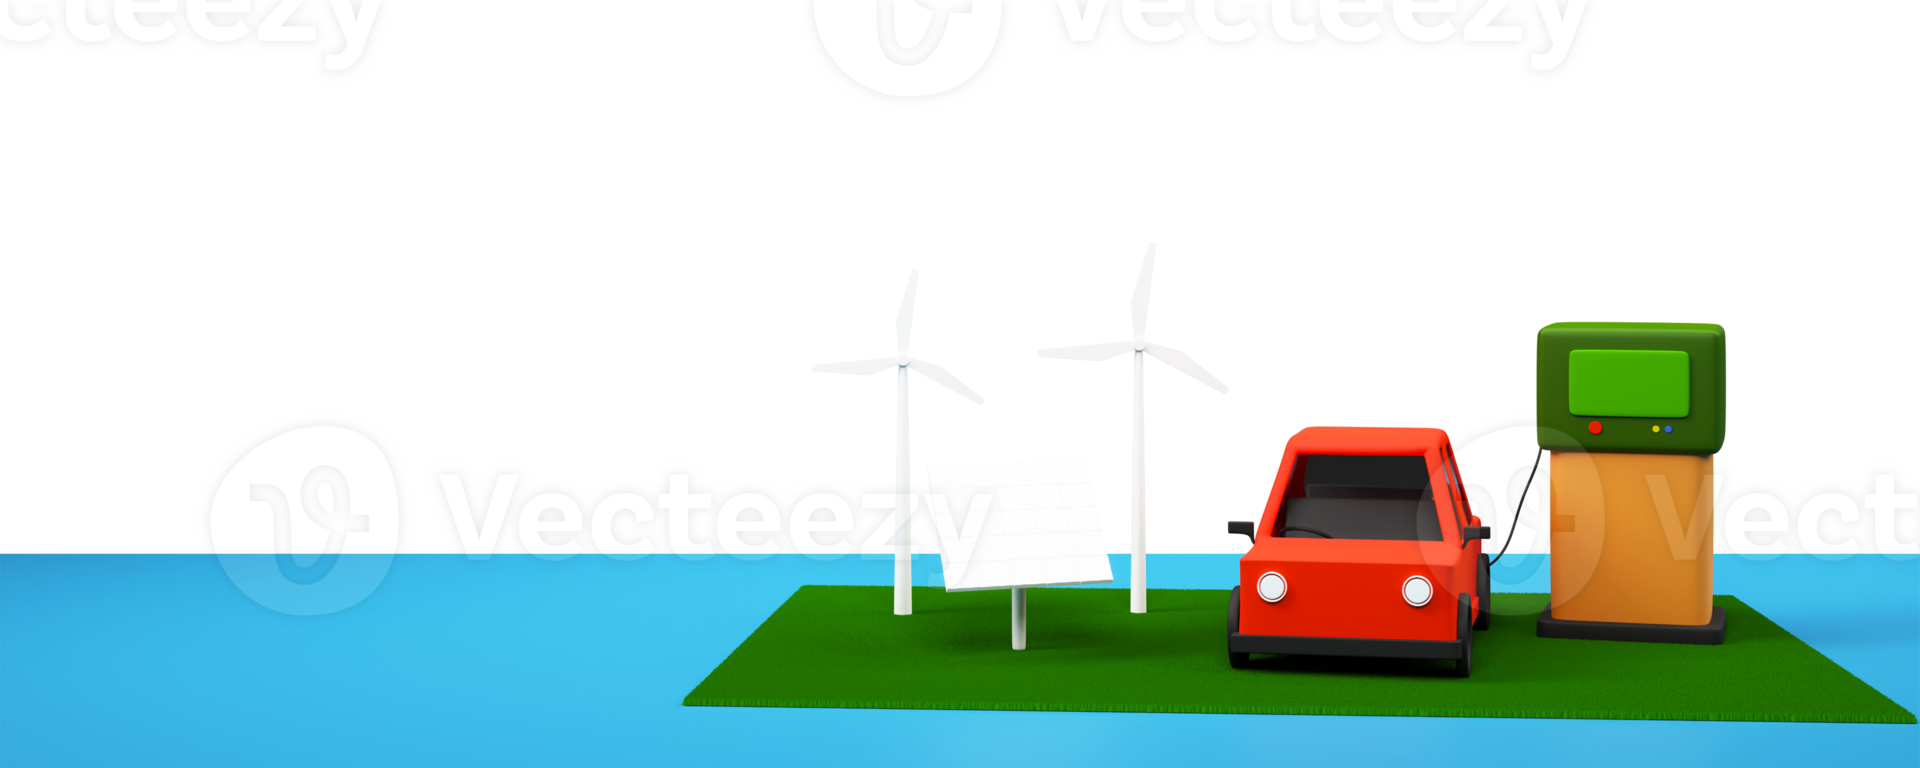 3D Electric Vehicle Charging In Station With Windmills And Solar Panel